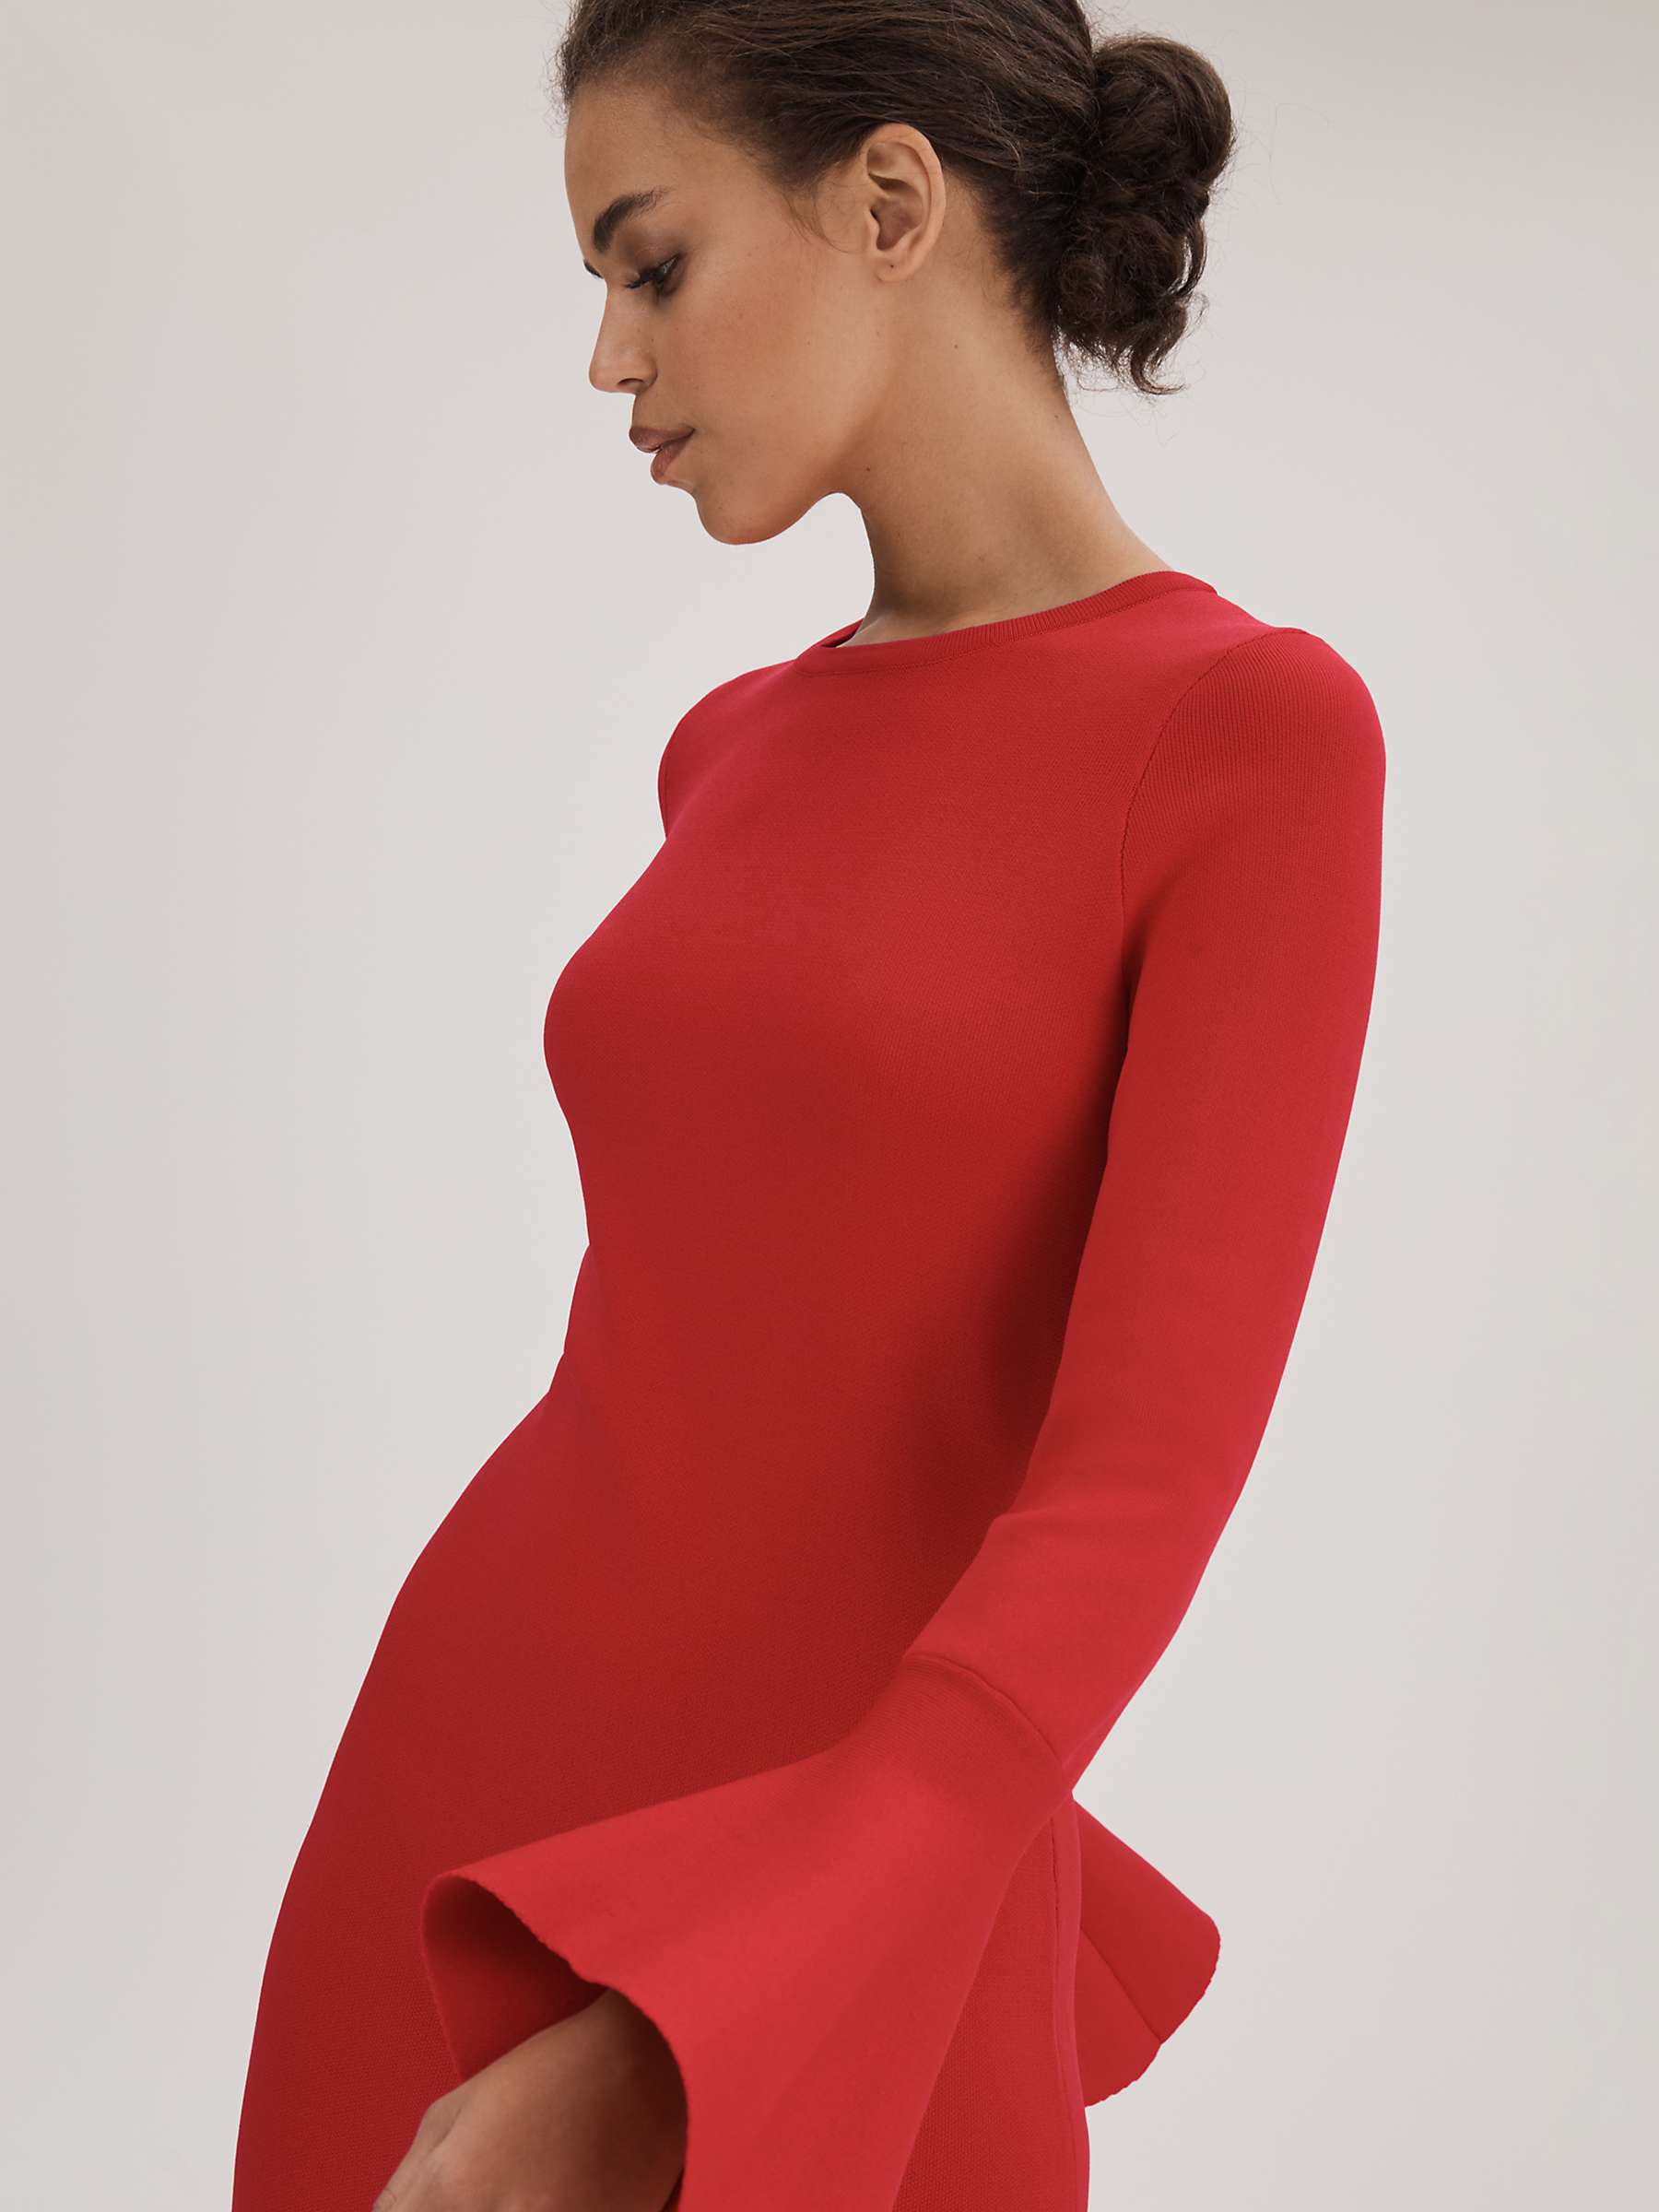 Buy FLORERE Fluted Cuff Midi Dress, Deep Coral Online at johnlewis.com